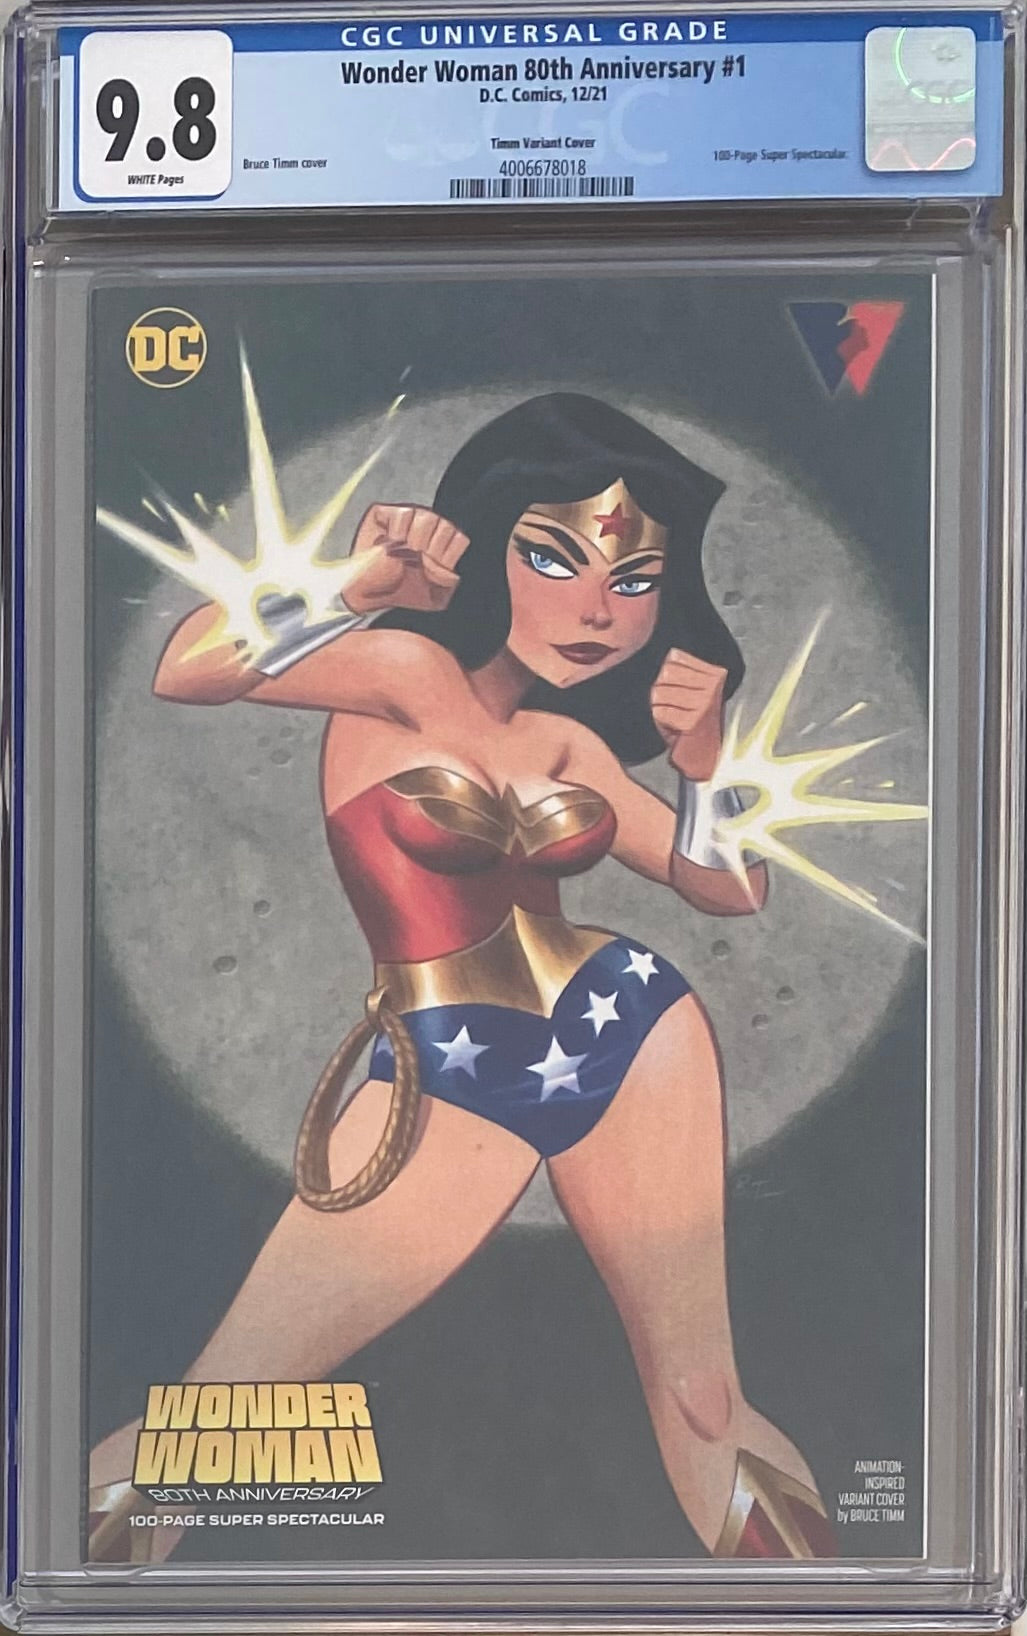 Wonder Woman 80th Anniversary 100 Page Super Spectacular #1 Timm Variant CGC 9.8